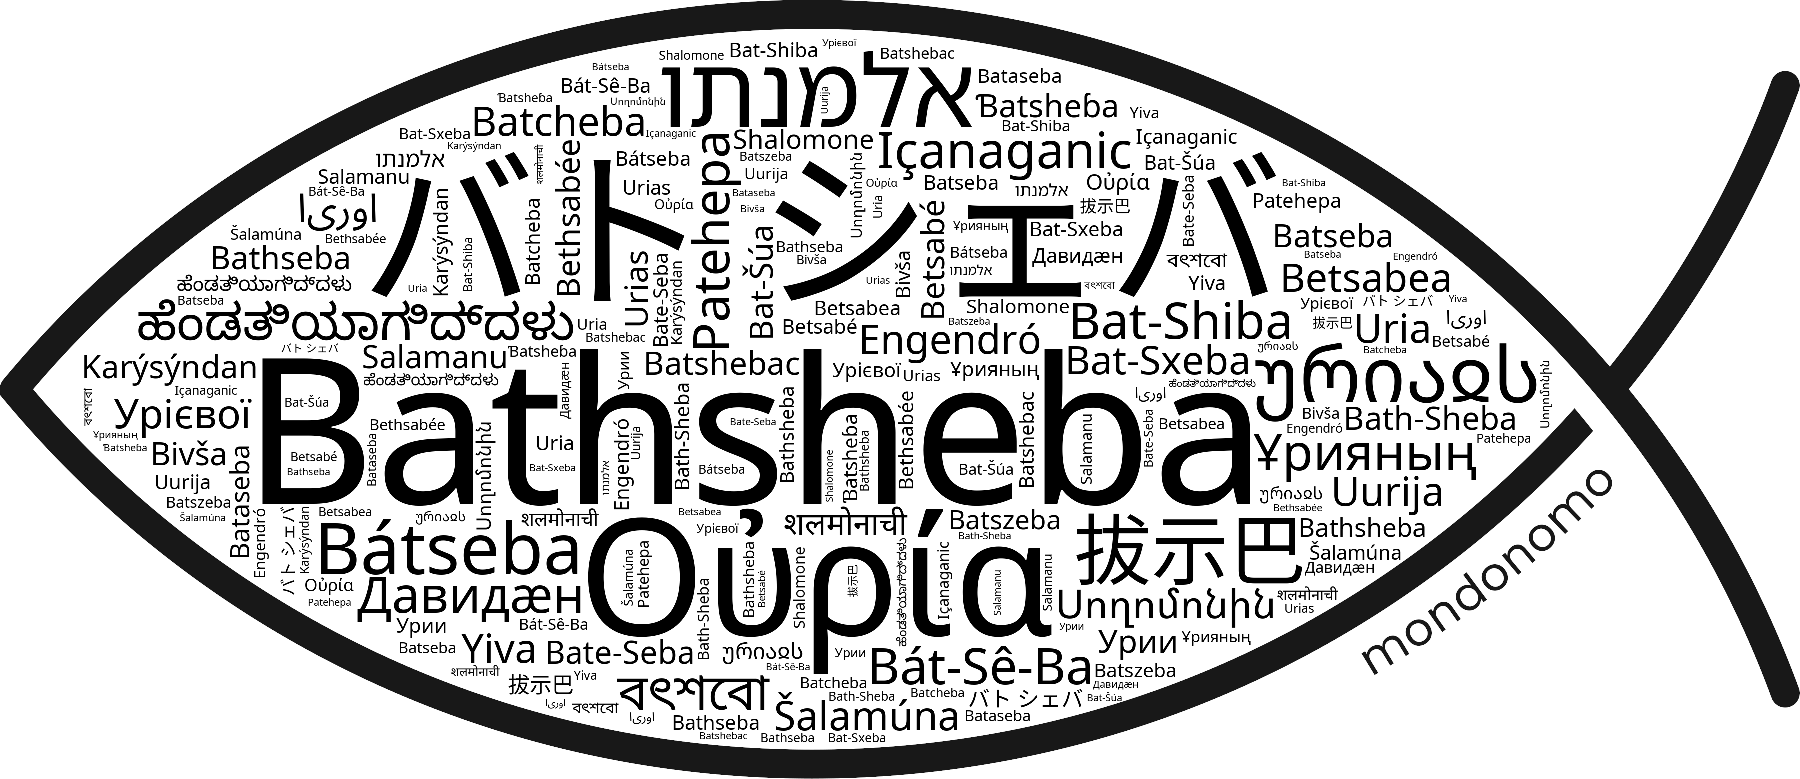 Name Bathsheba in the world's Bibles